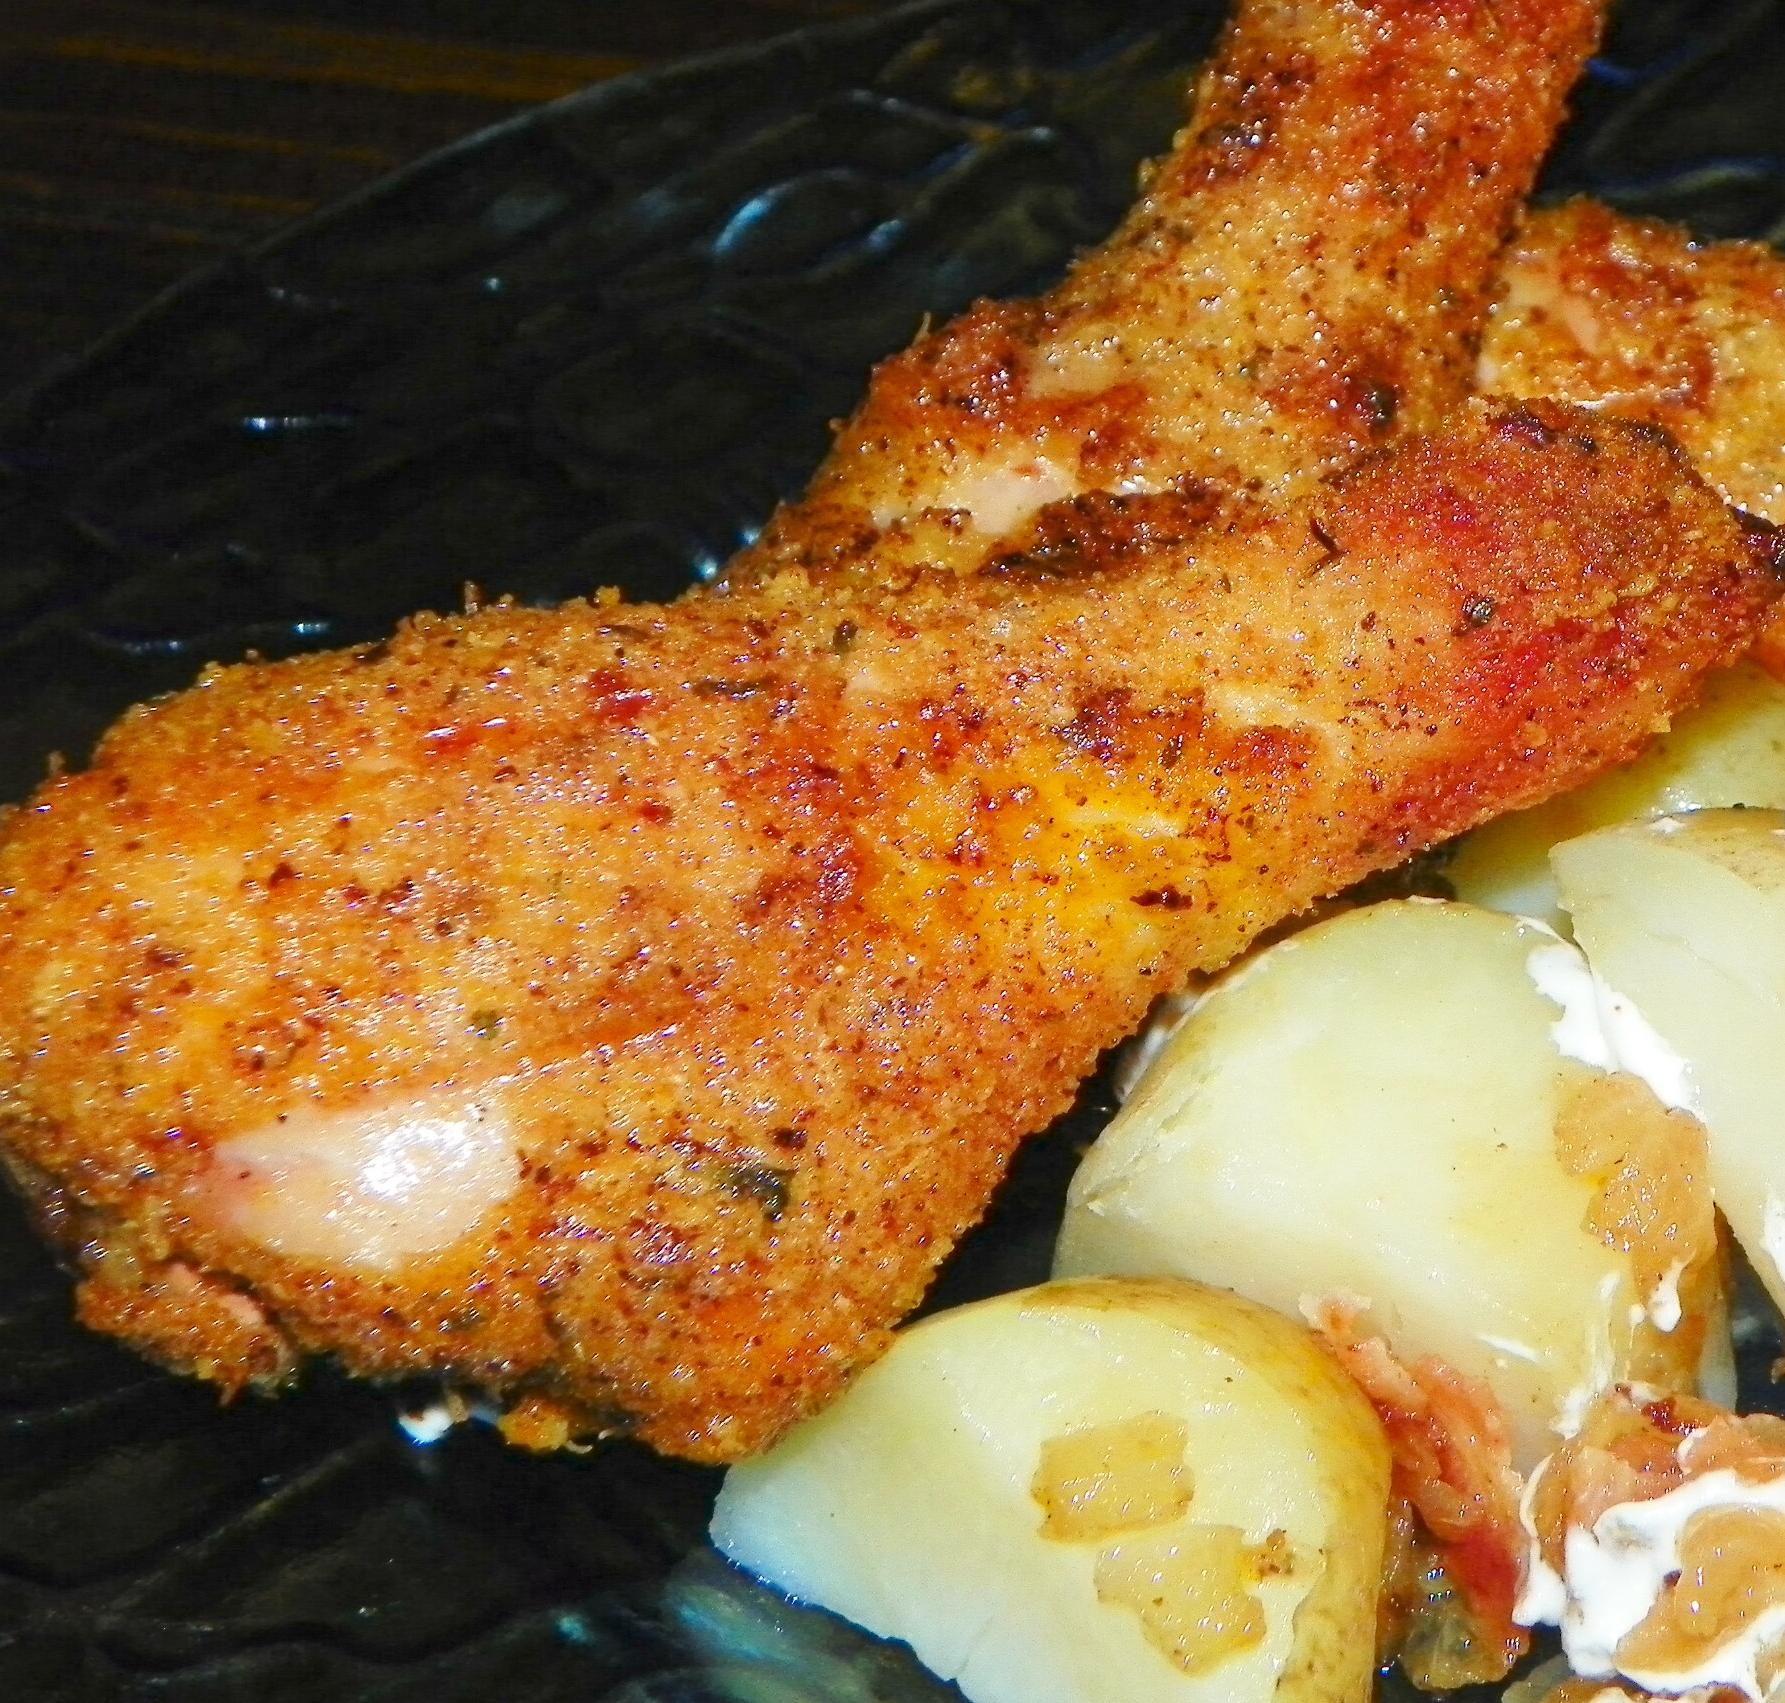  Can you smell the aroma of this crispy and flavorful chicken?